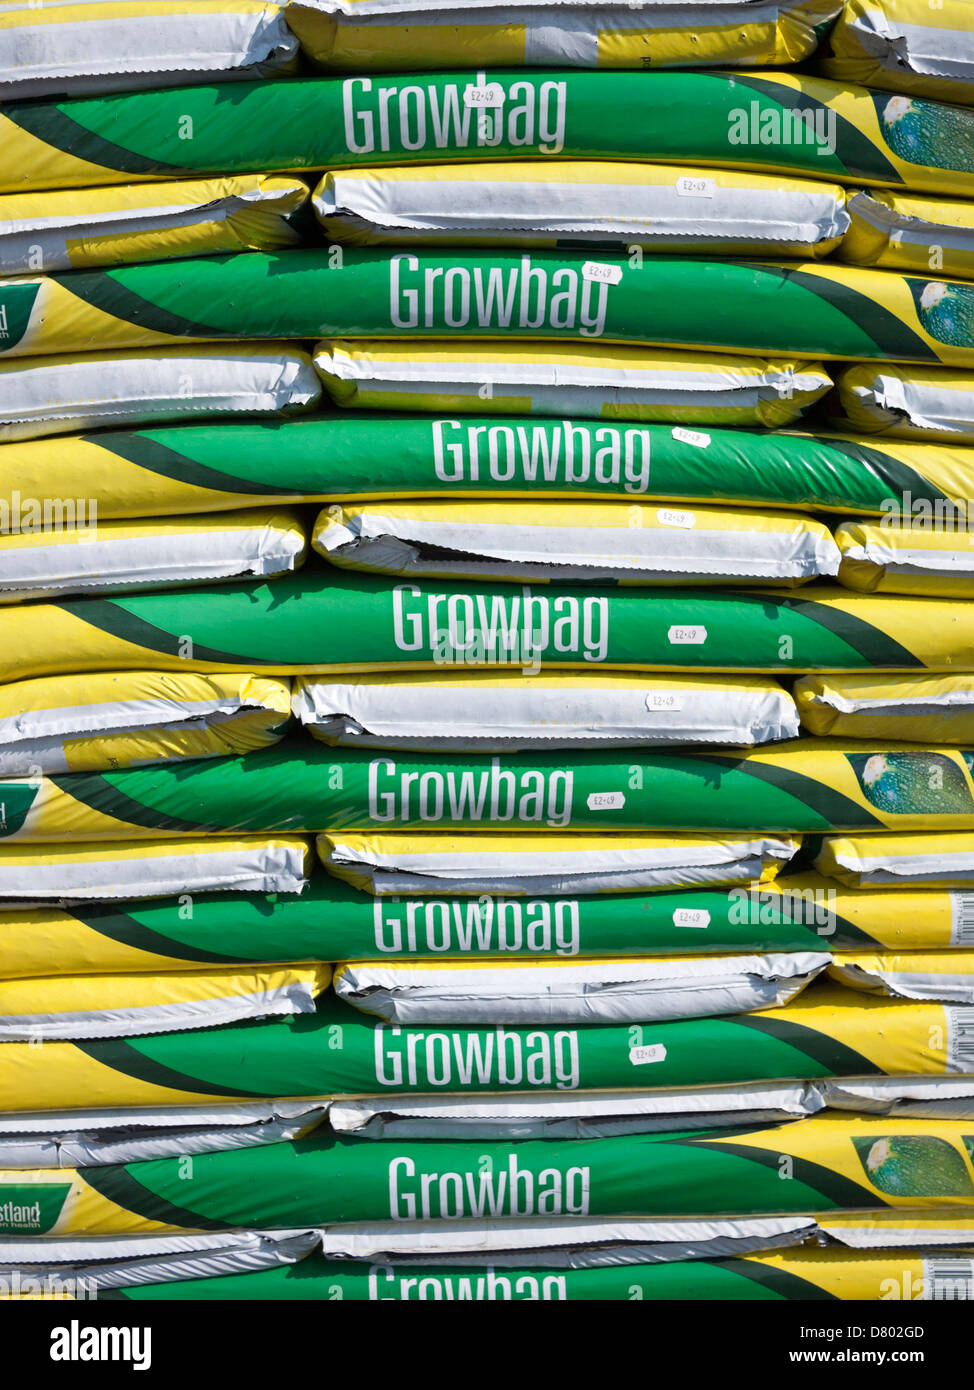 A pile of grow bags at a garden centre in the UK. The bags are full of compost and used to grow vegetables and plants. Stock Photo